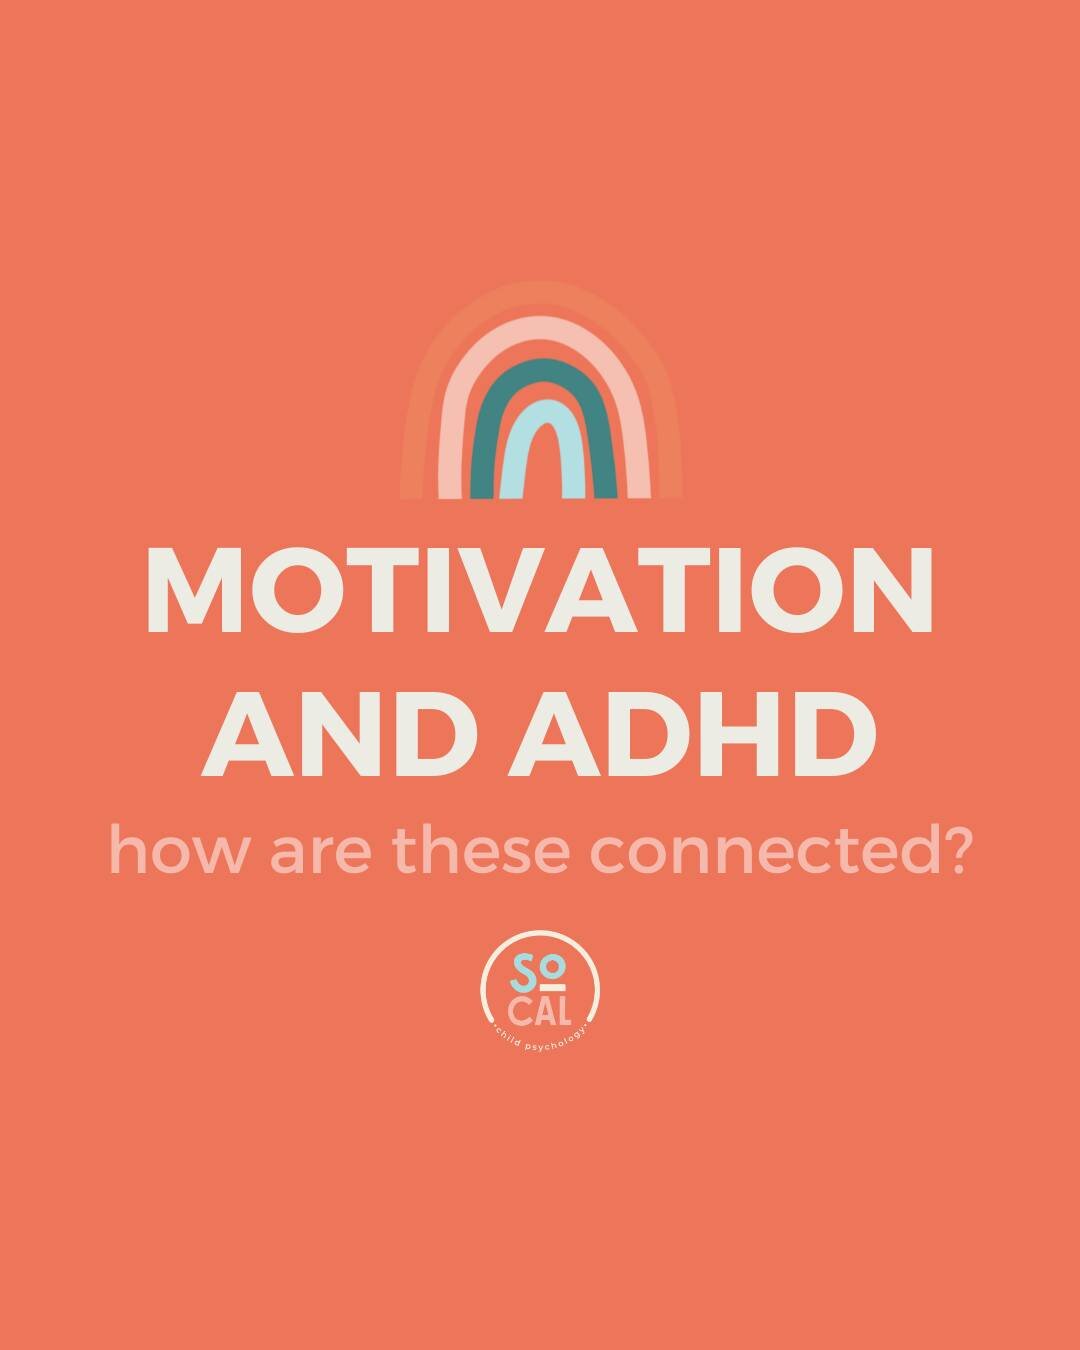 As a child psychologist specializing in ADHD, I usually get questions on motivation and ADHD correlation.💡

📌 Swipe to see the connection between the two and learn even more!

If you're looking for some support, here are some resources that you can